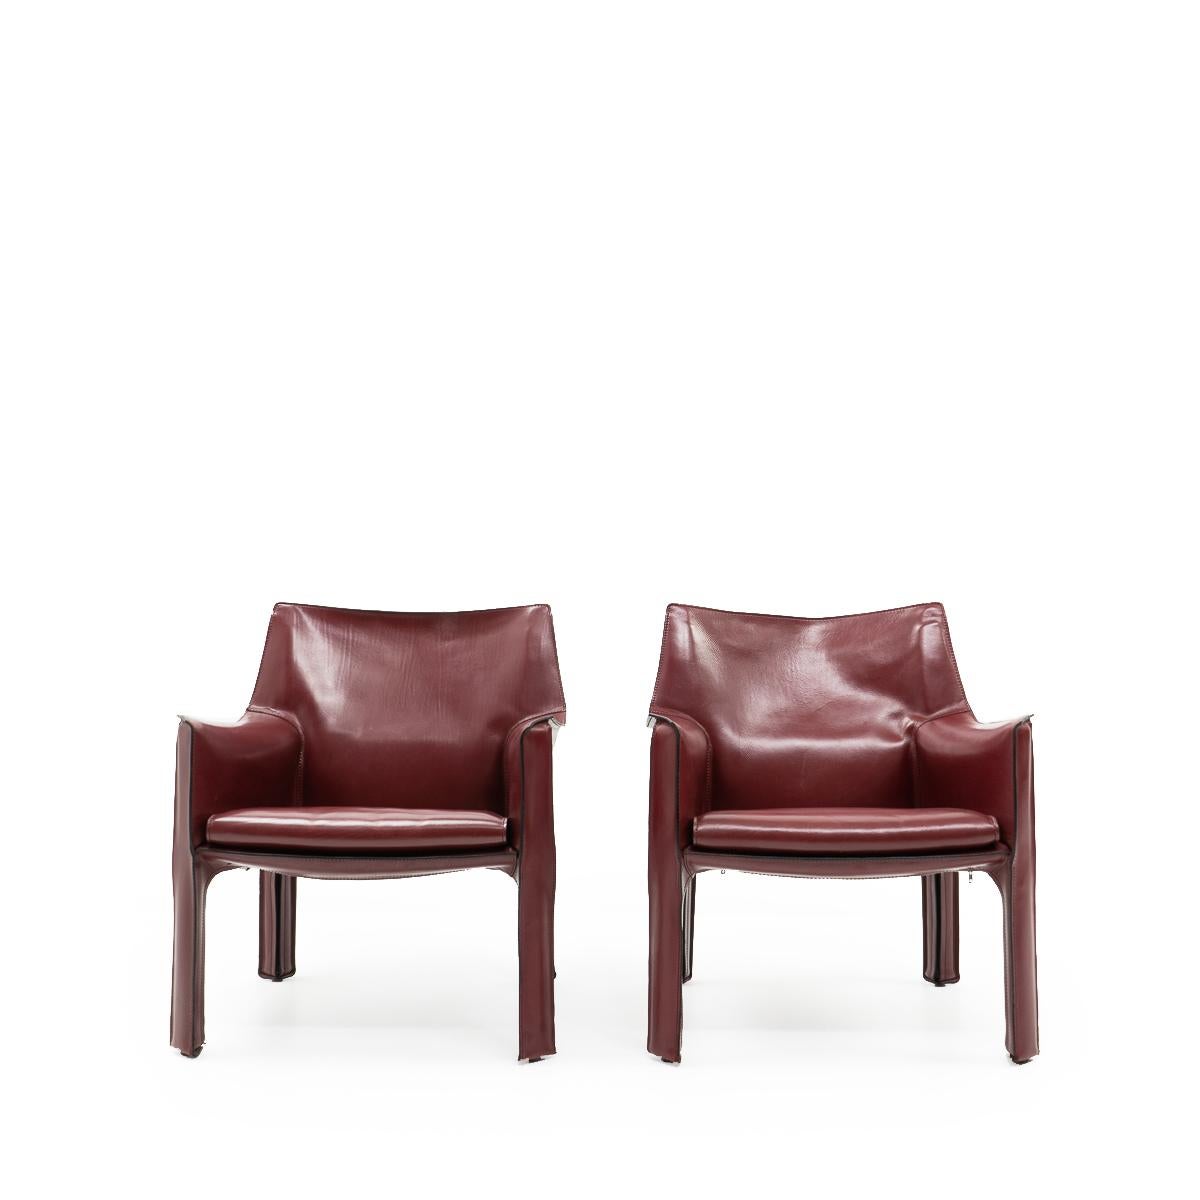 Set of two Cab 414 armchairs in a deep, bordeaux red leather by Mario Bellini for Cassina.

These very comfortable lounge chairs are built up with a tubular steel frame over which foam and thick saddle leather is fitted. The leather skin is kept